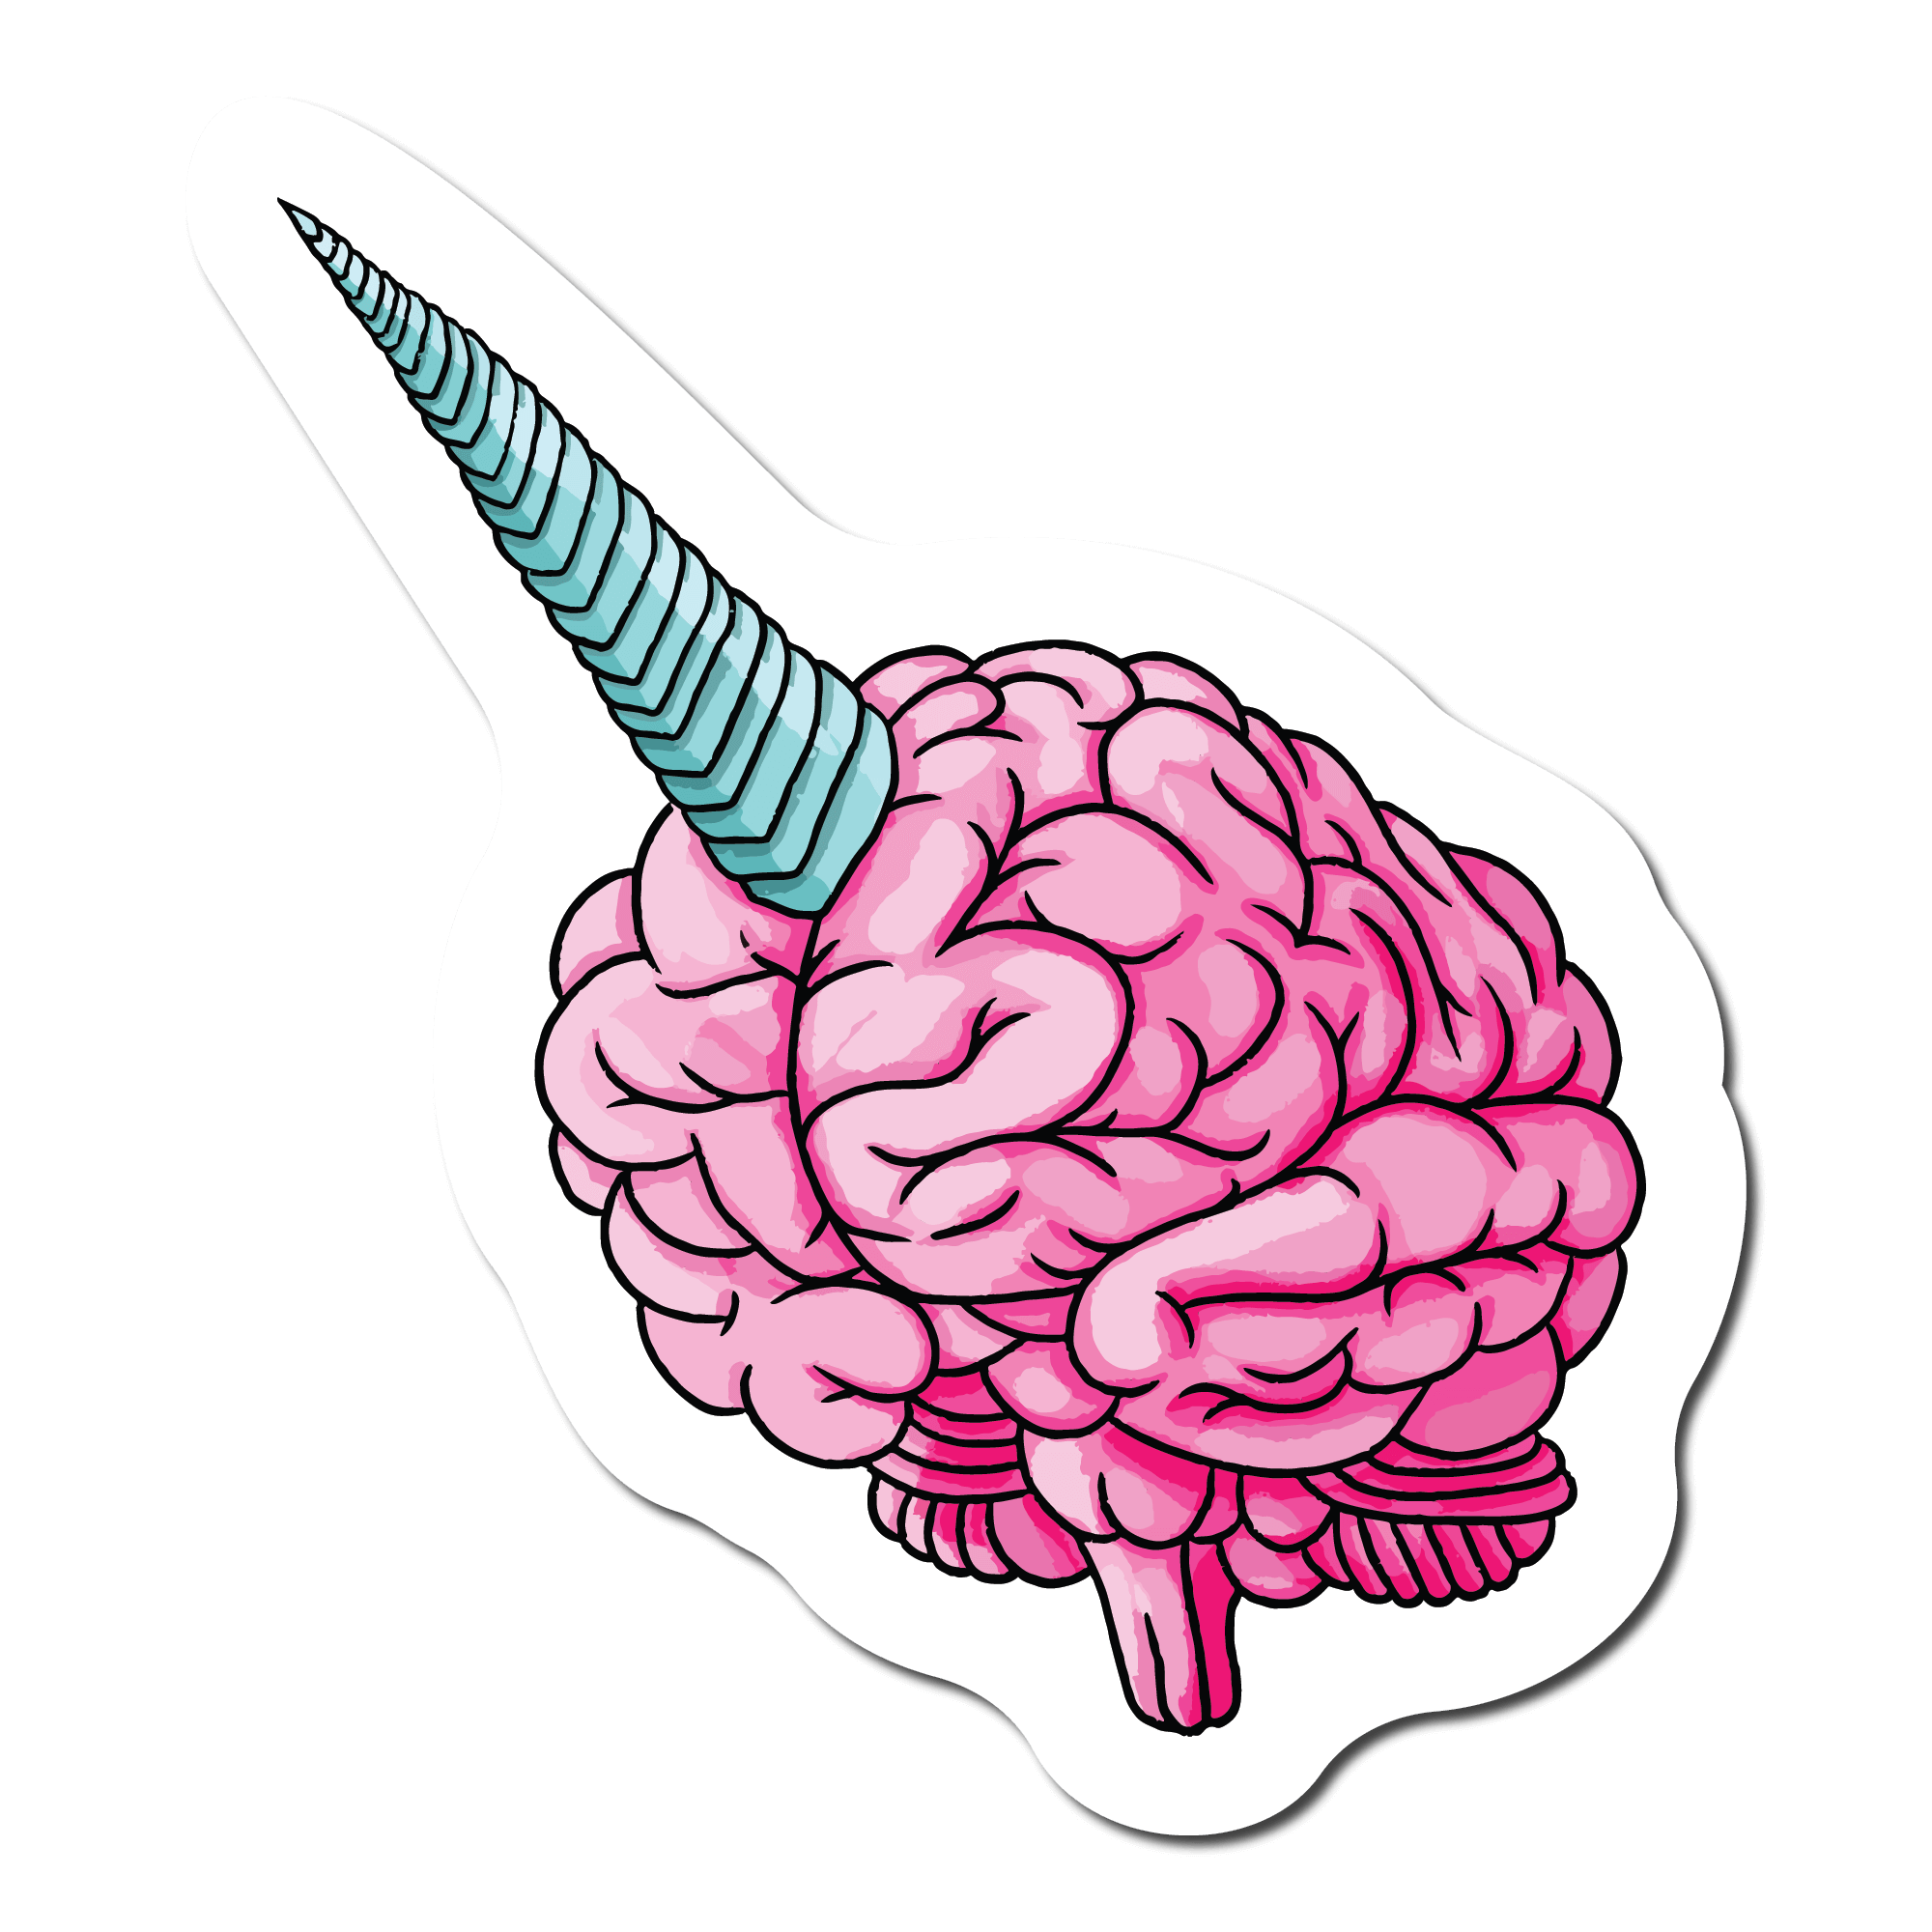 Small Sticker of a brain with a unicorn horn